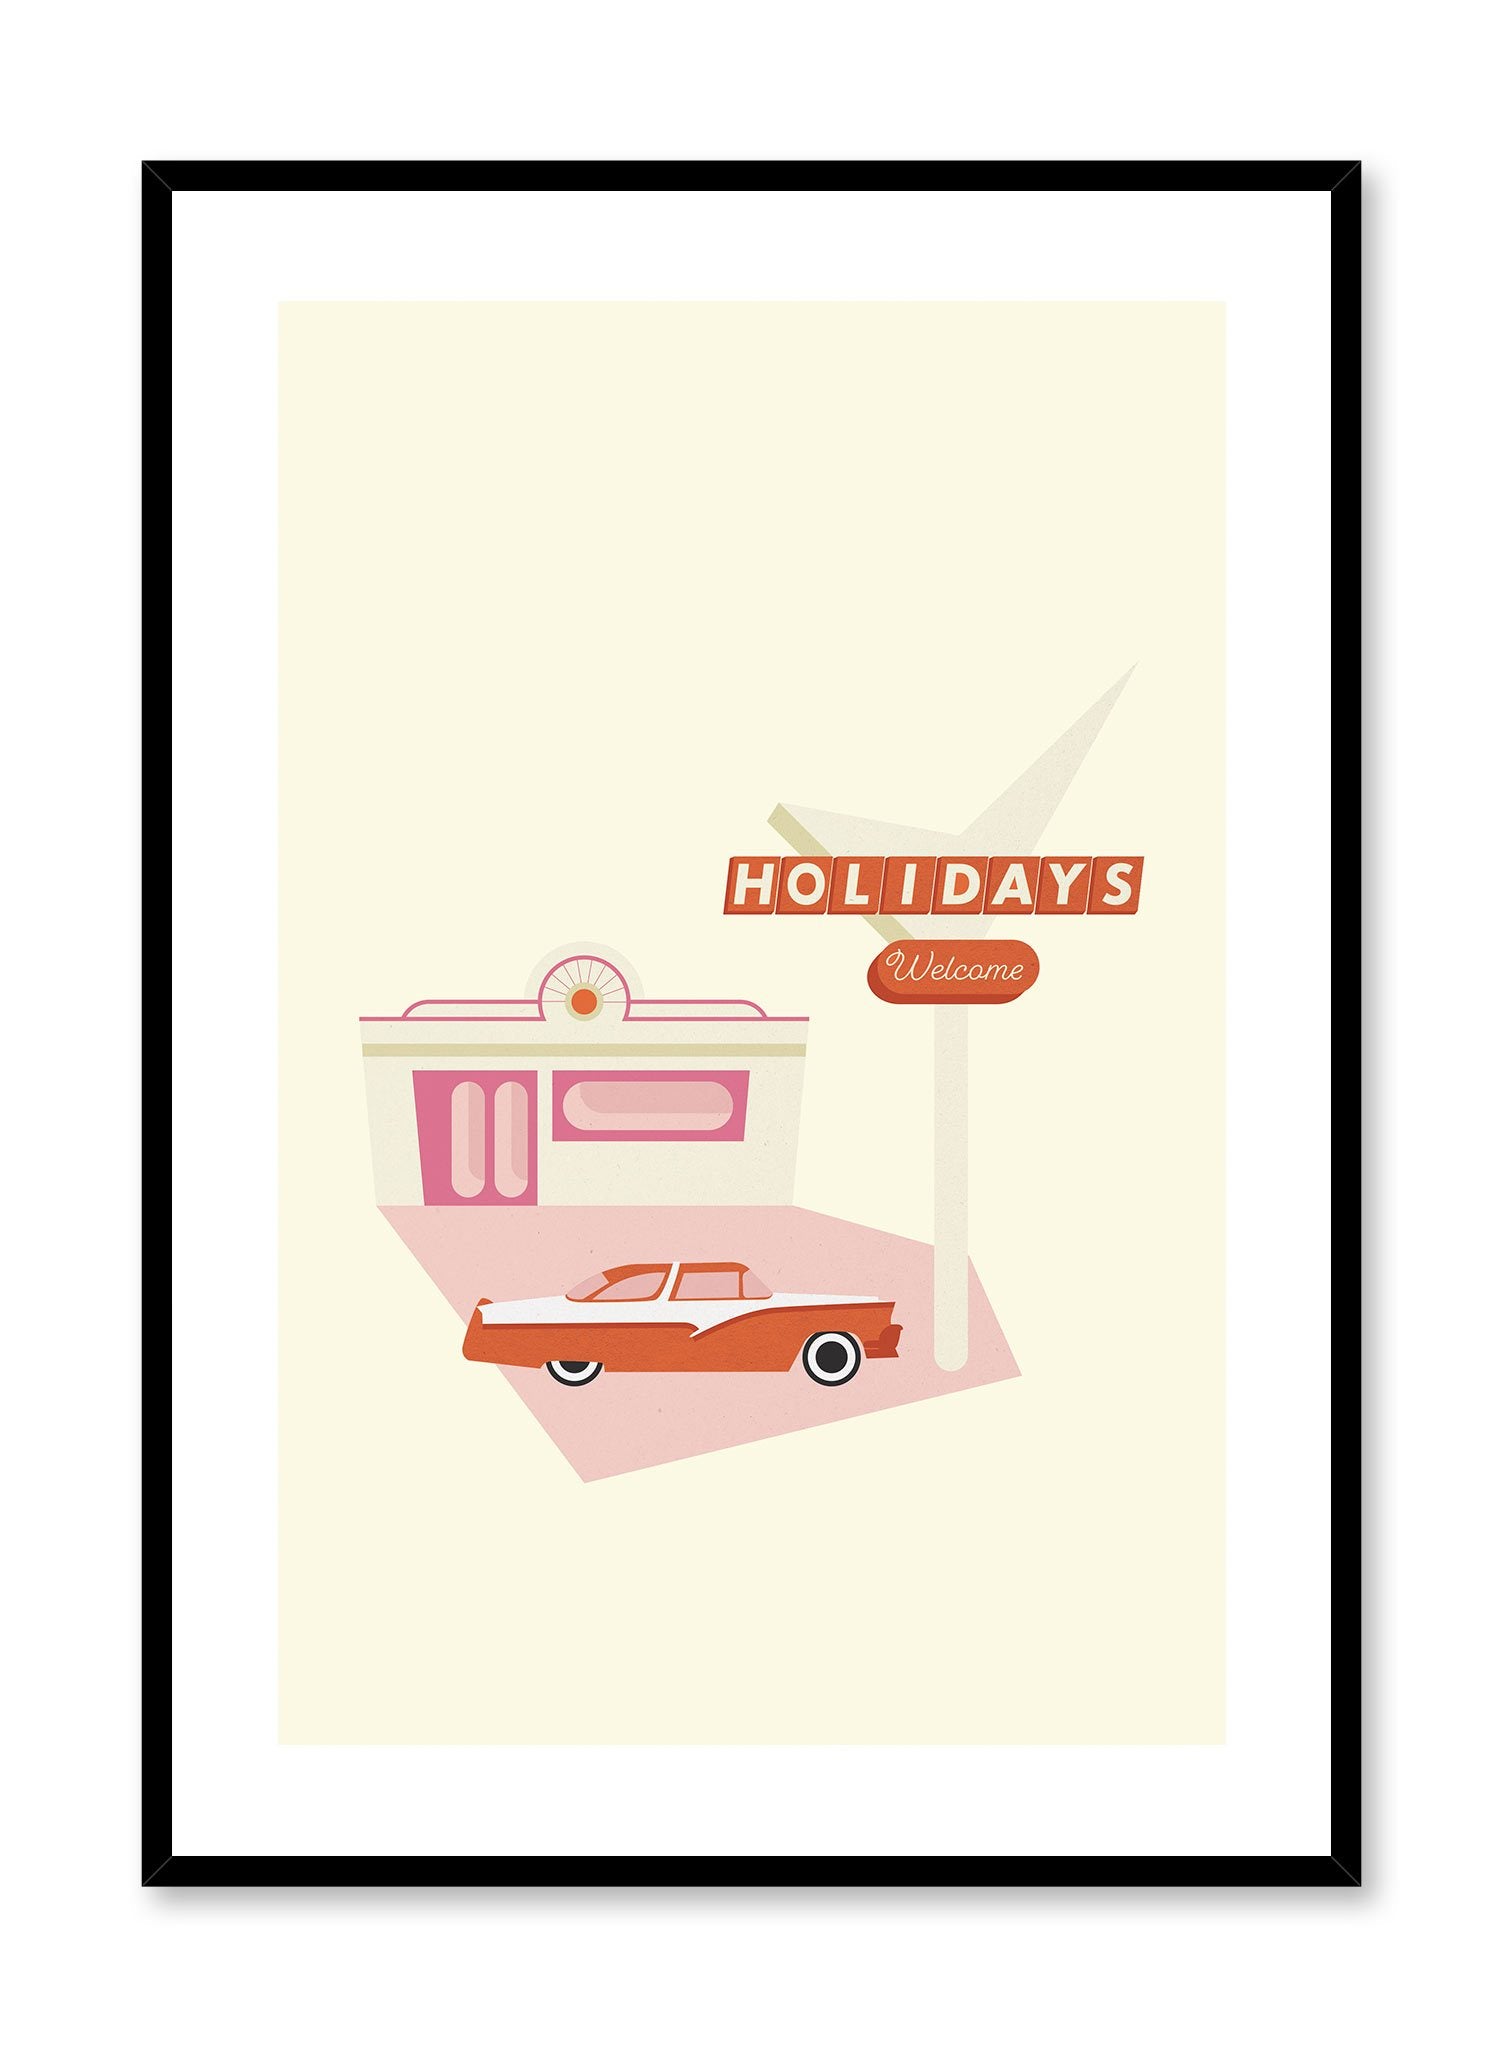 Retro Holiday is a minimalist illustration poster of a '50s car by Opposite Wall.